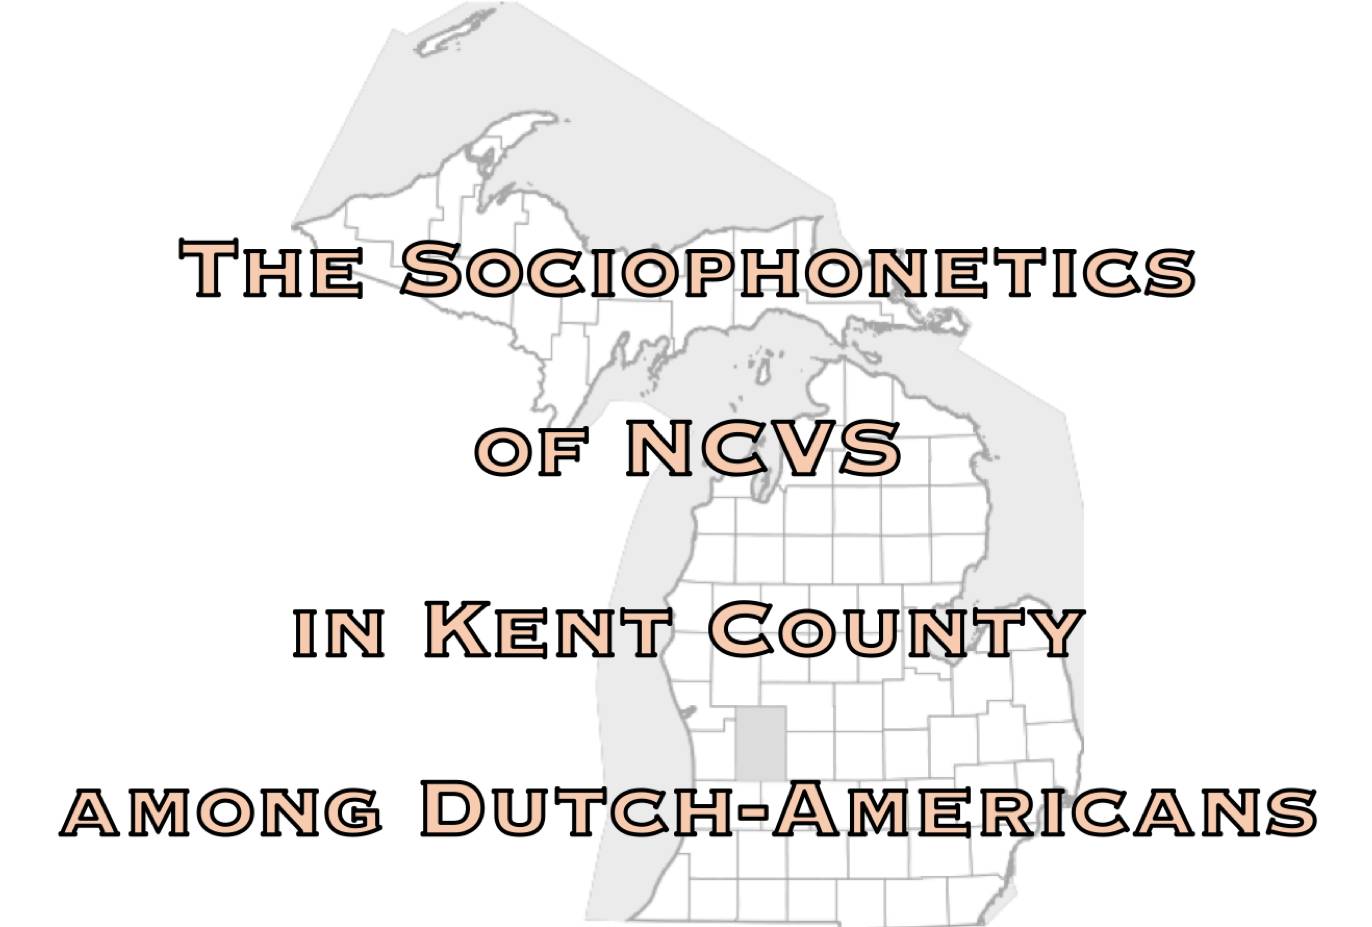 The Sociophonetics of NCVS in Kent County among Dutch-Americans